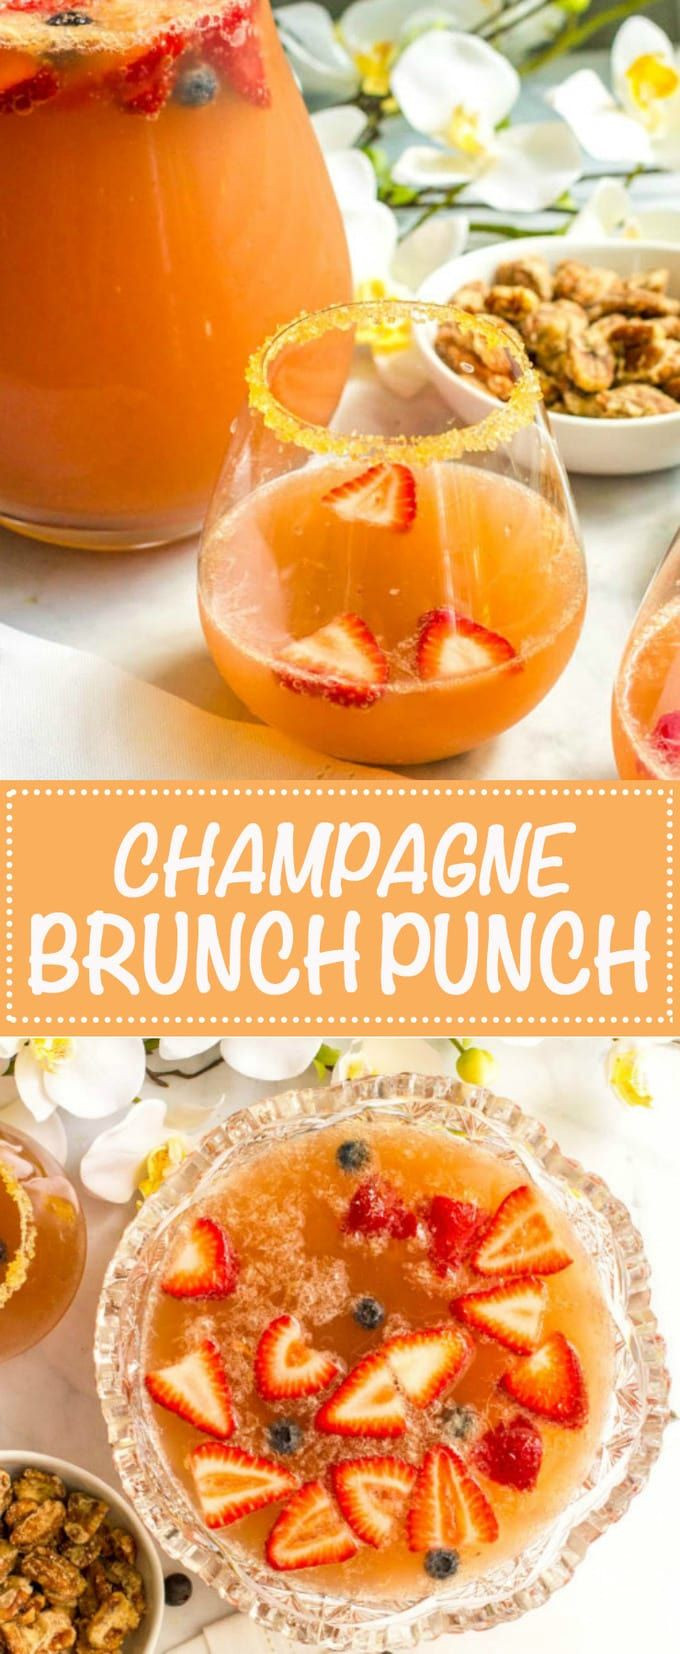 Champagne Drinks For Brunch
 Champagne brunch punch Family Food on the Table